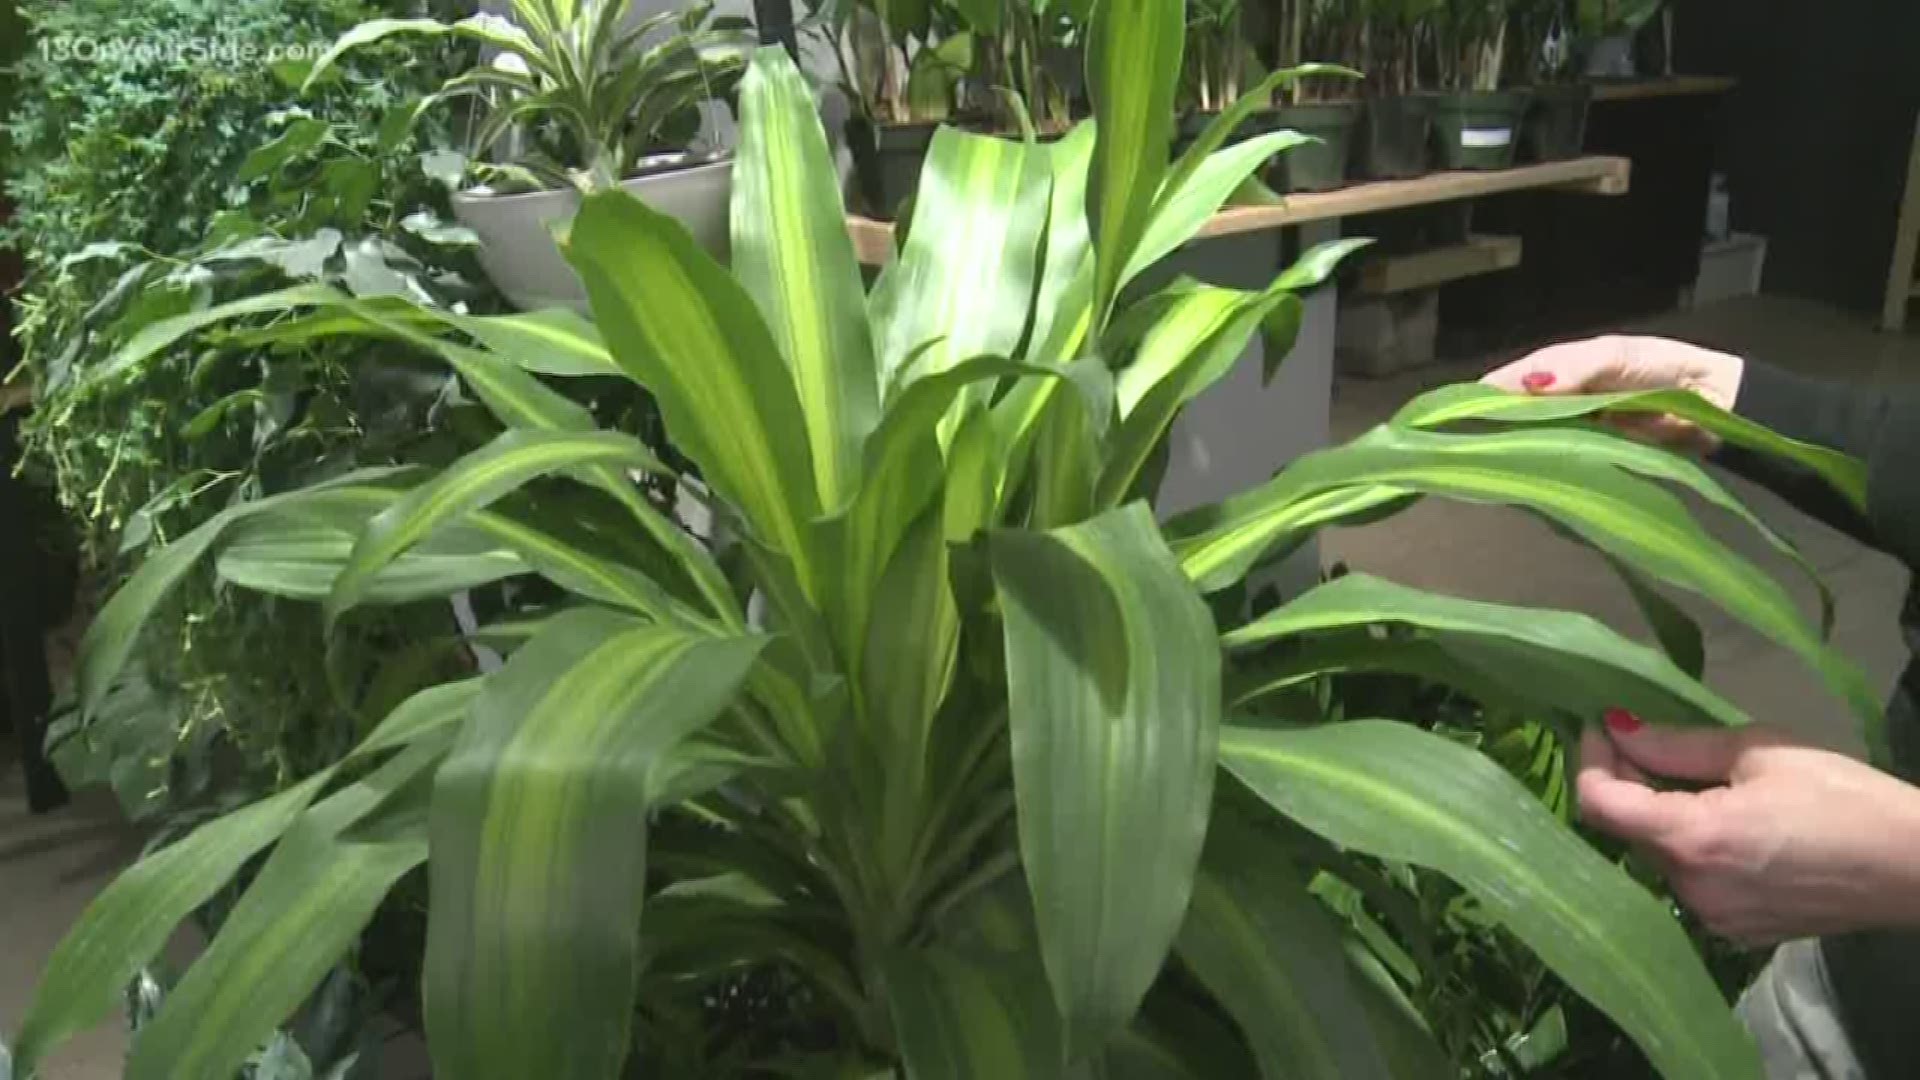 House plants aren't just pretty to look at, some varieties can remove toxins from the air in your home.